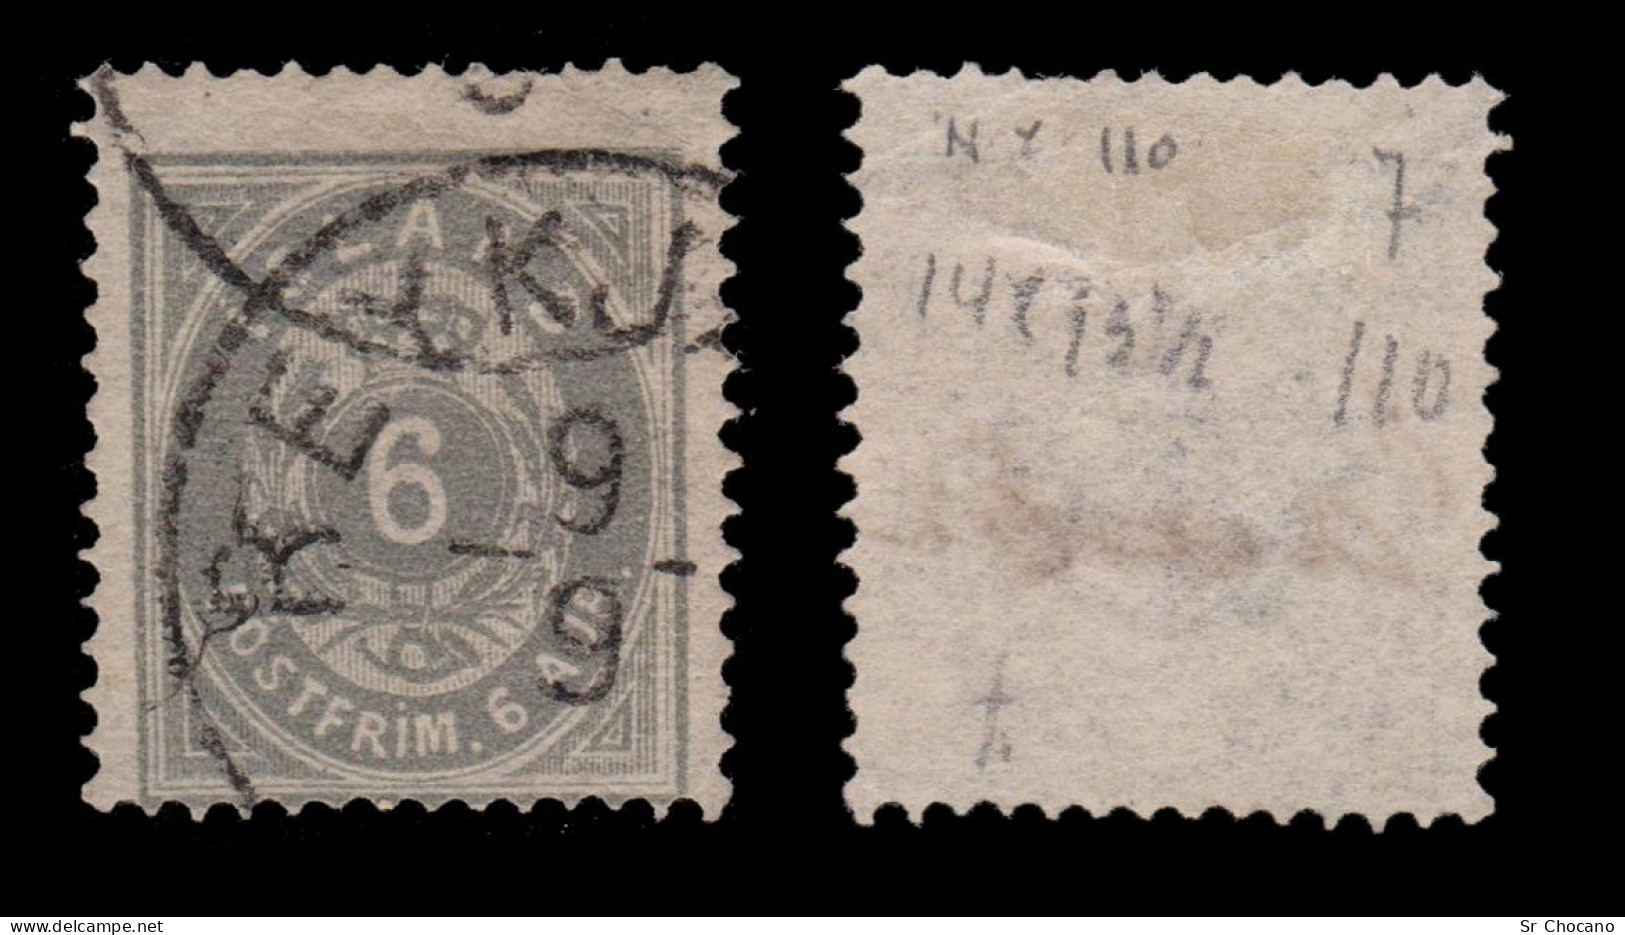 ICELAND STAMP.1876.6a.Scott.10.USED.Perf.14x13 ½ - Usados